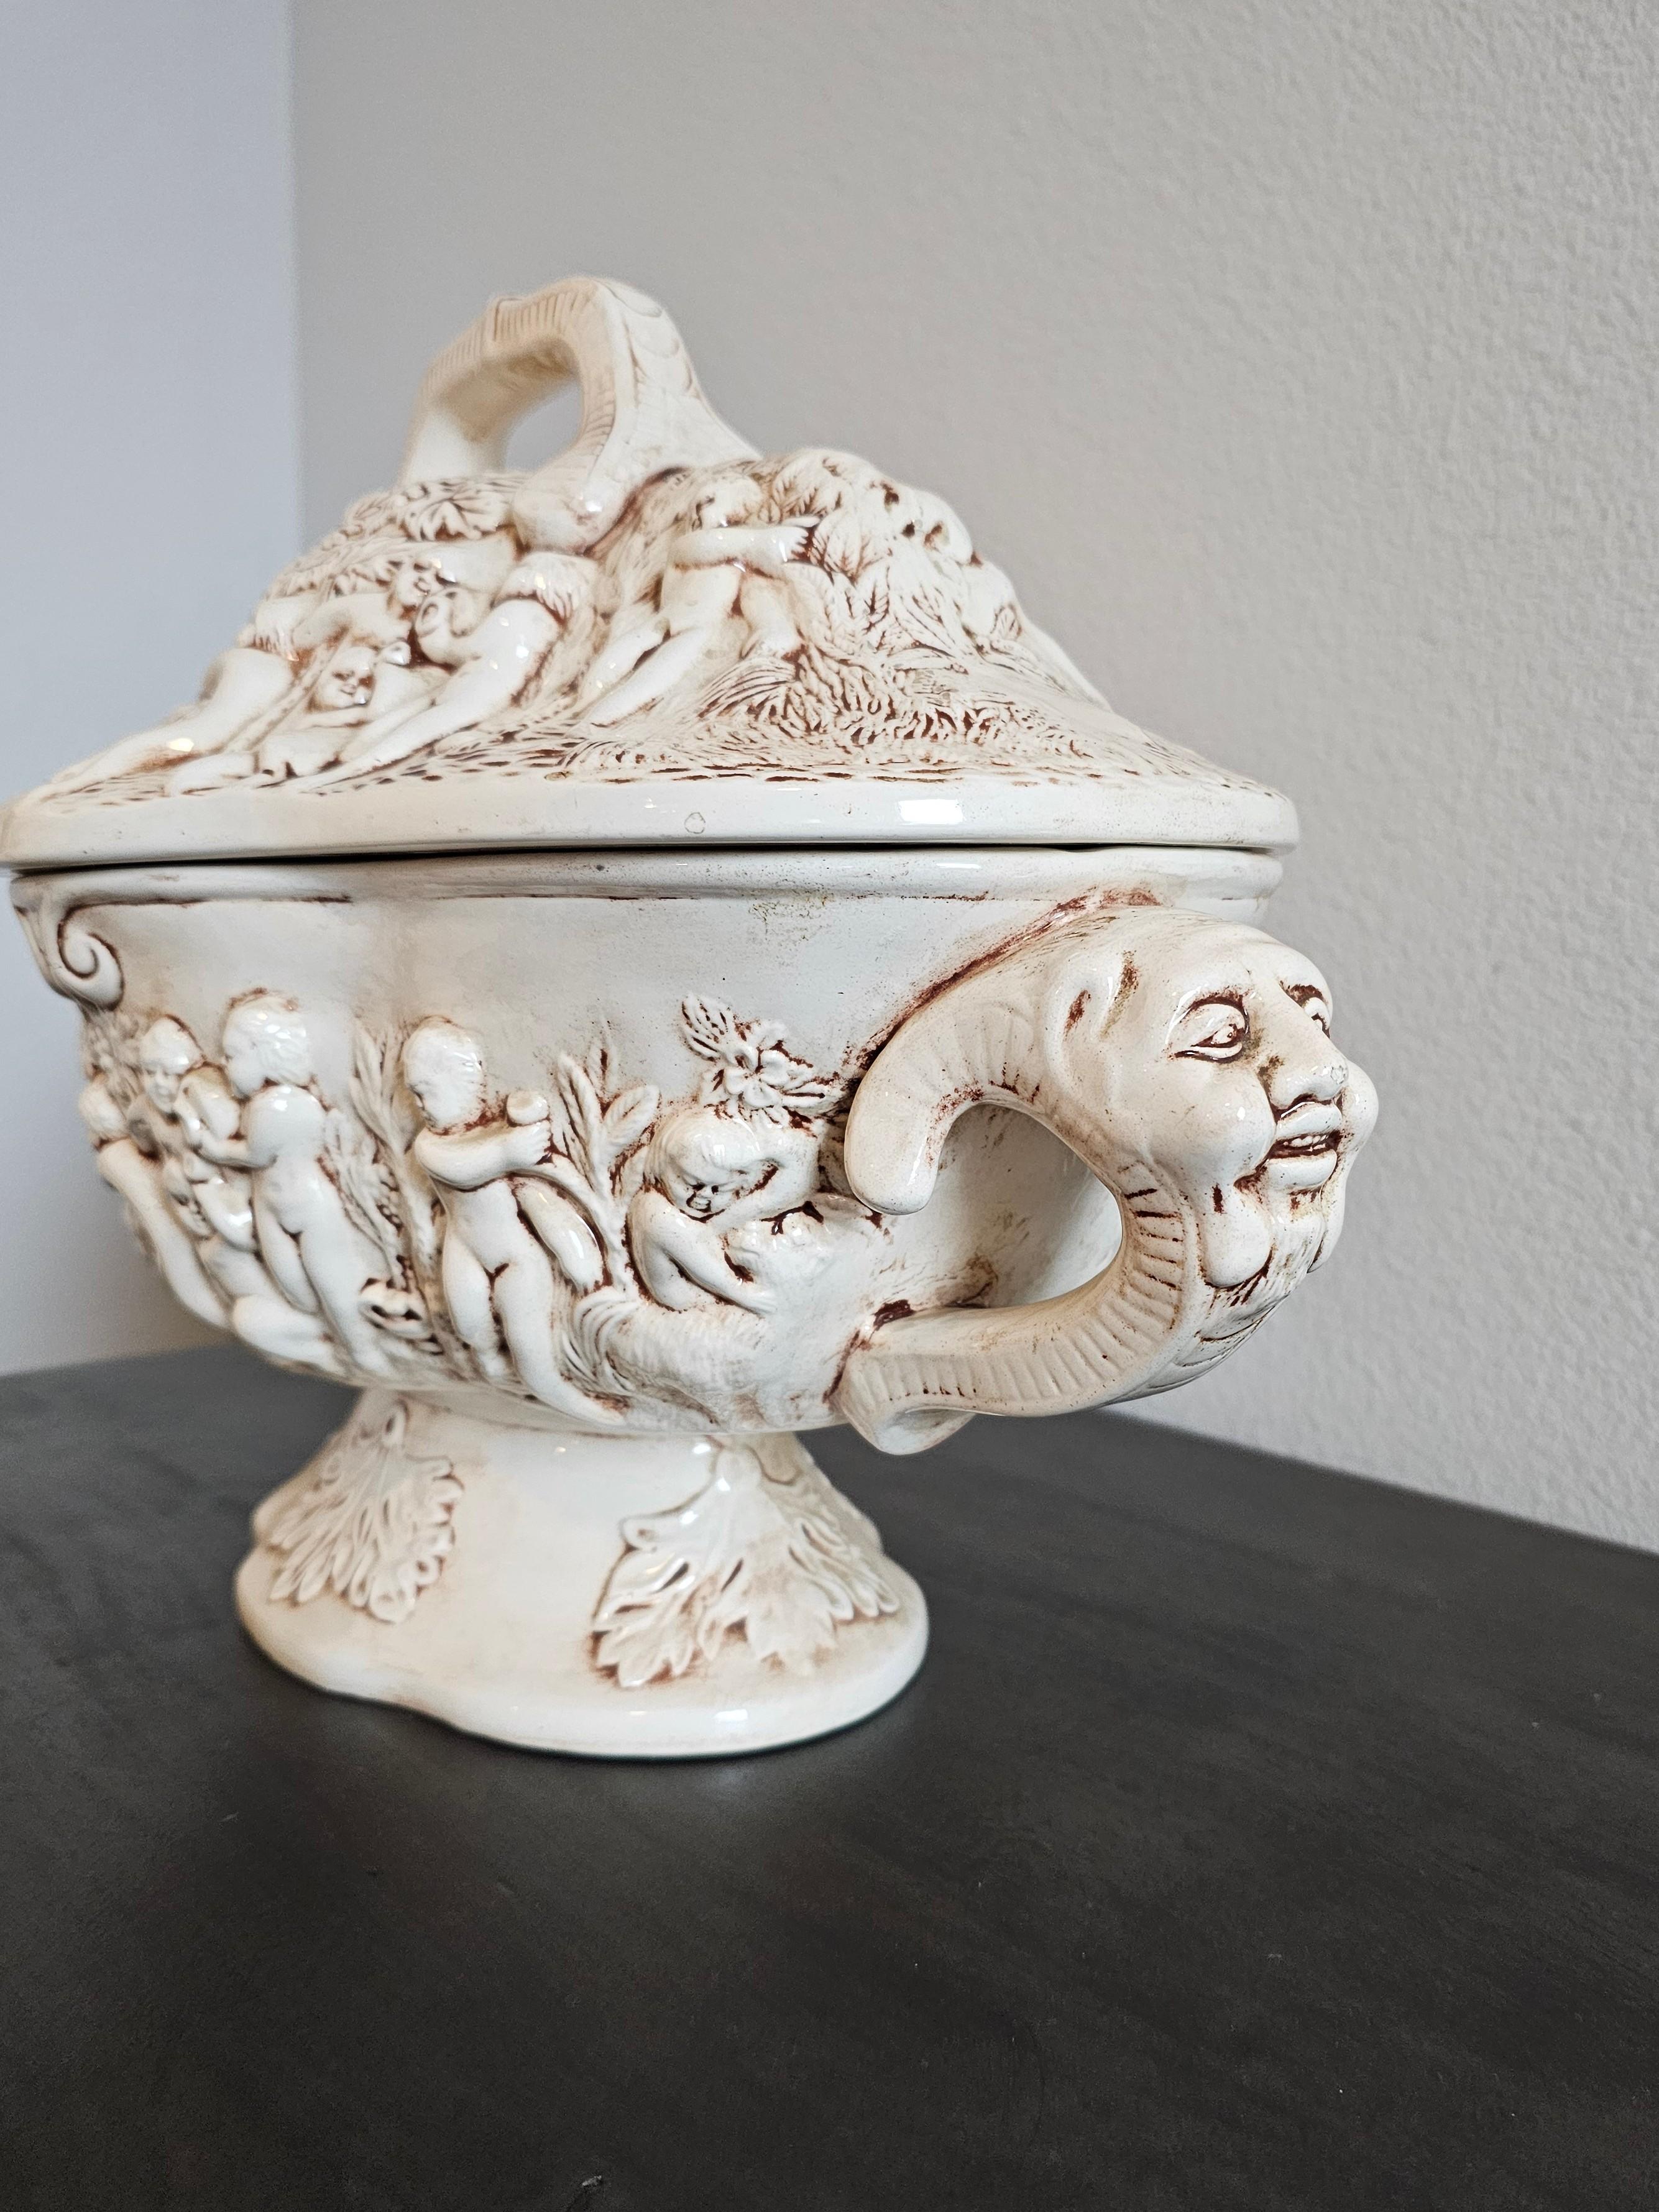 Vintage Italian Capodimonte Porcelain Covered Serving Dish Large Soup Tureen For Sale 6